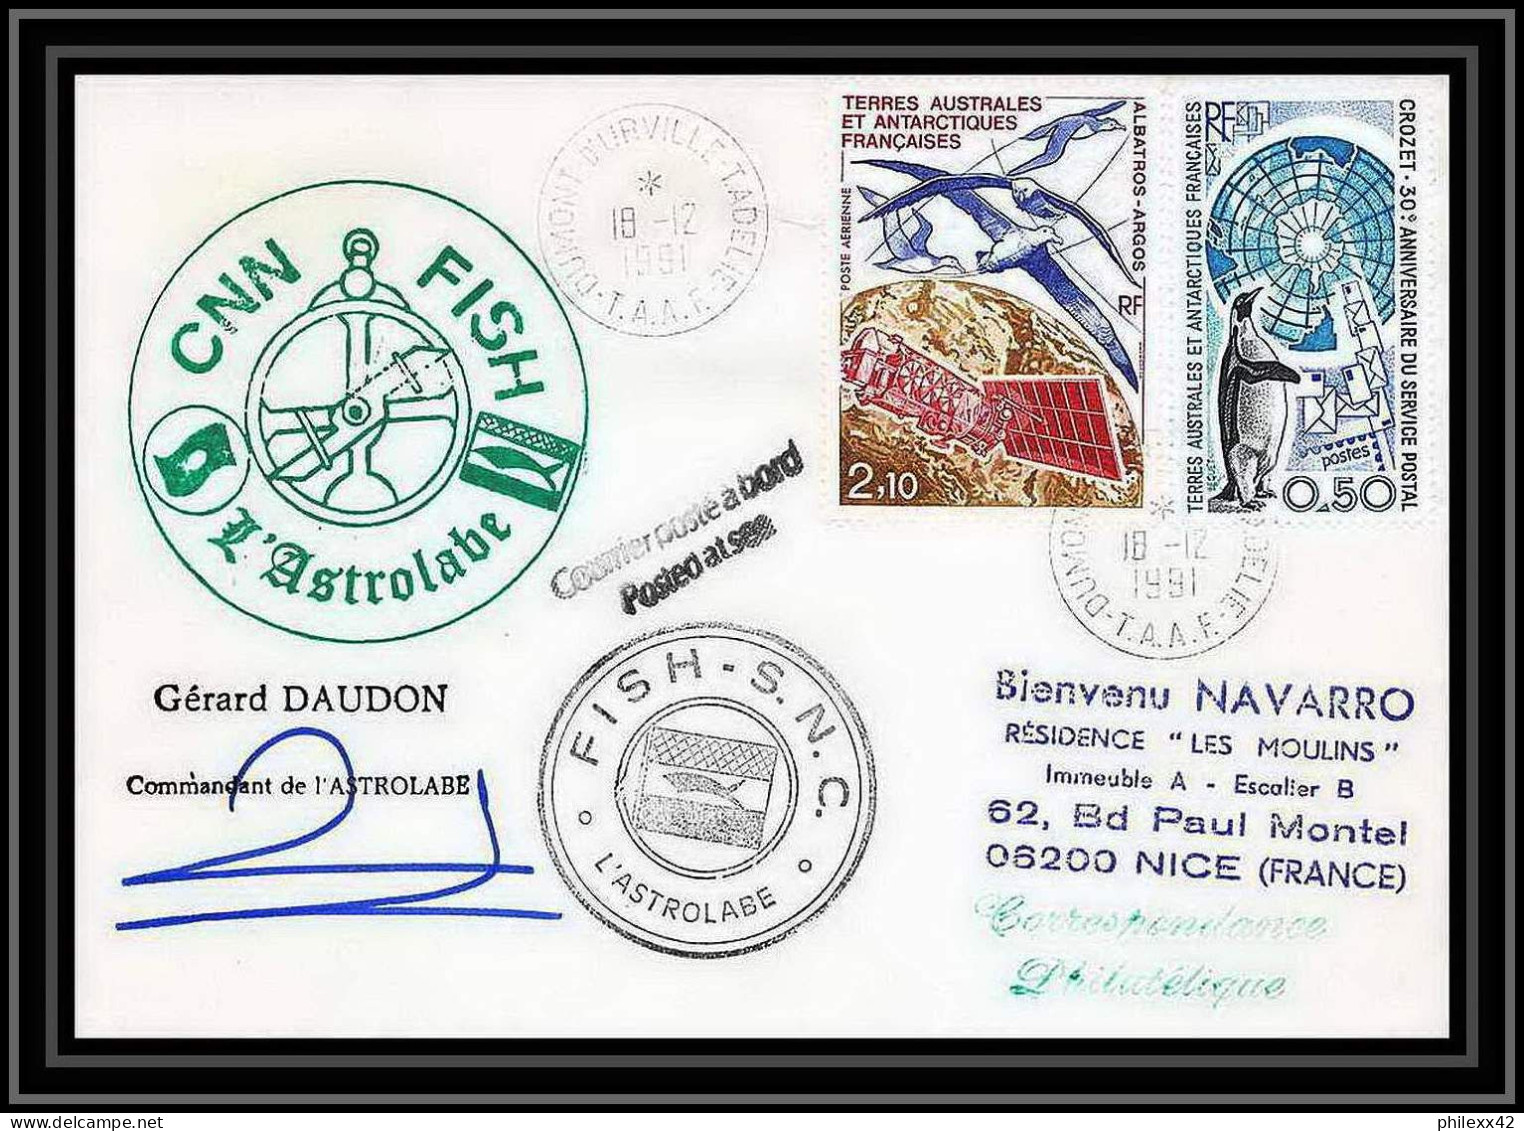 1776 Astrobale Signé Signed Daudon 18/12/1991 TAAF Antarctic Terres Australes Lettre (cover) - Antarktis-Expeditionen